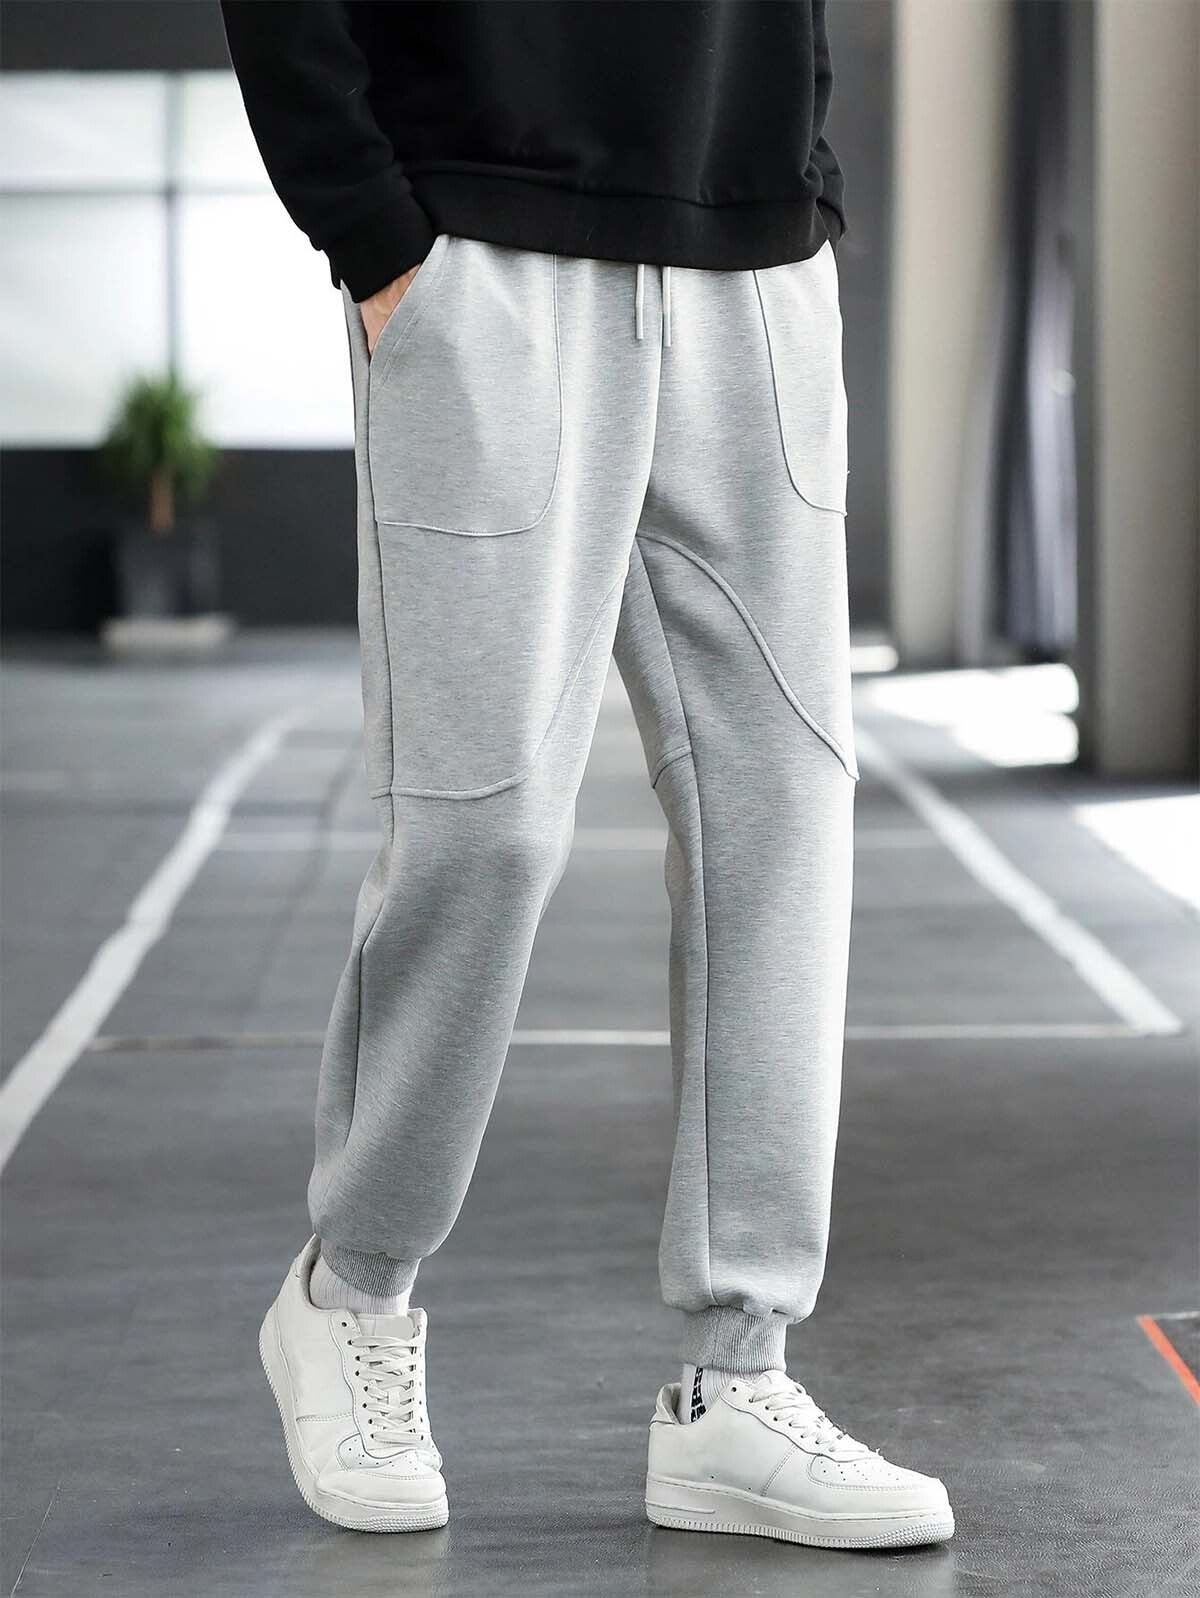 Men's Joggers Outfit Ideas: Look Stylish & Comfortable - Nobero